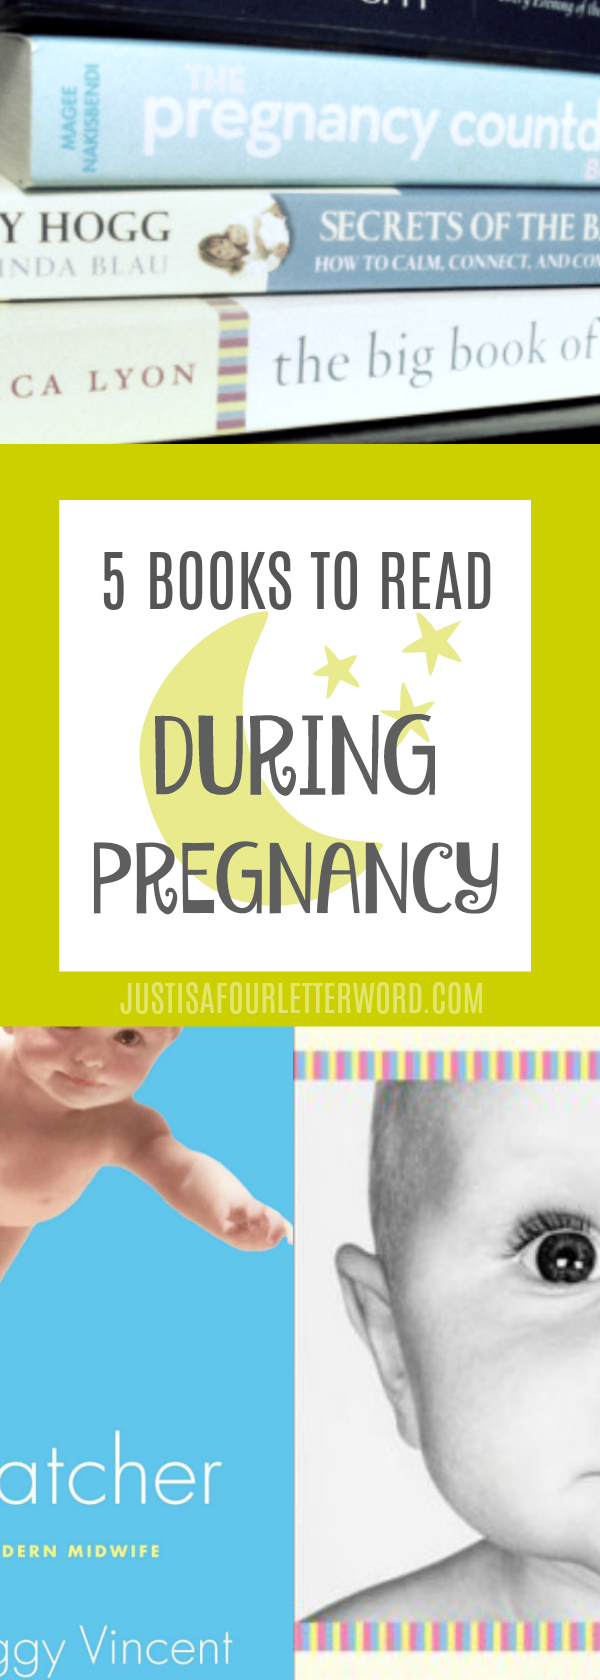 With my first baby, I read everything under the sun. With my second, I narrowed the list to my top 5 books to read during pregnancy to prep for birth and those early months of parenting a newborn. 